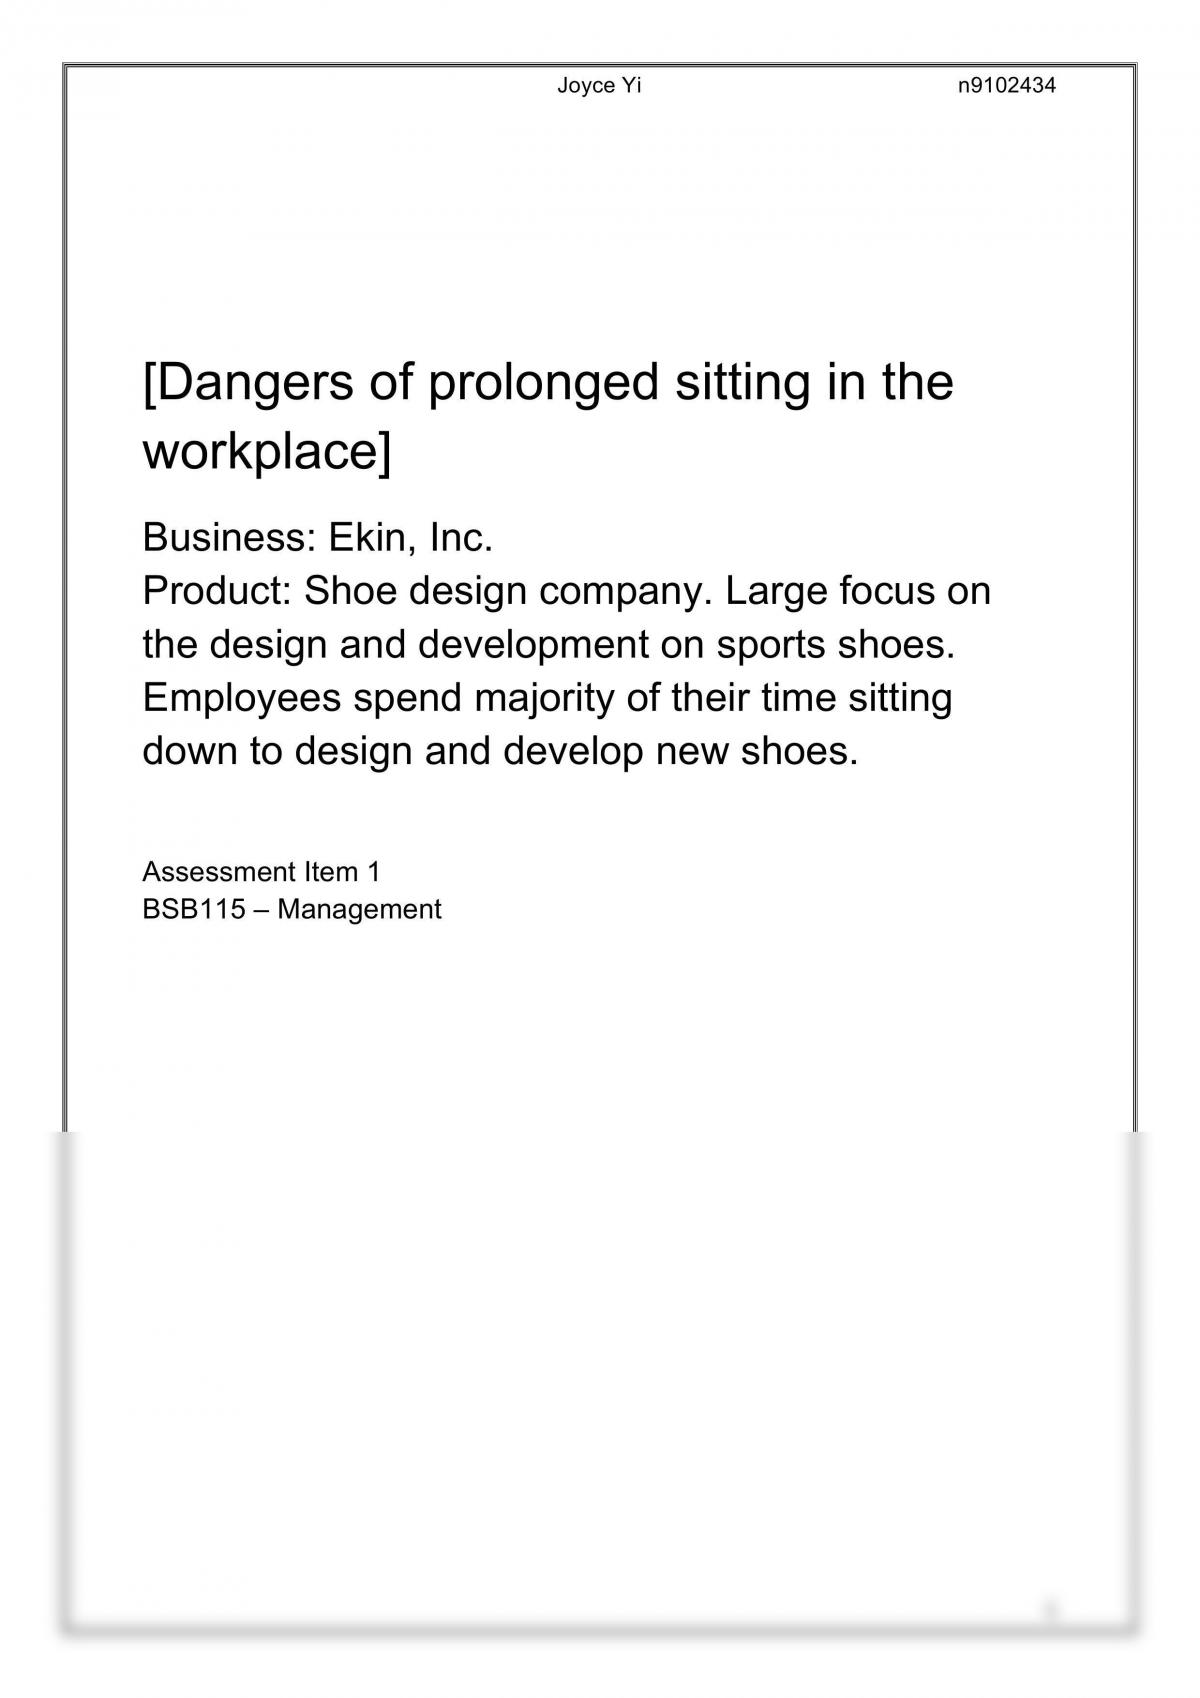 BSB115: VBD Brief (Dangers of Prolonged Sitting in the Workplace) - Page 1